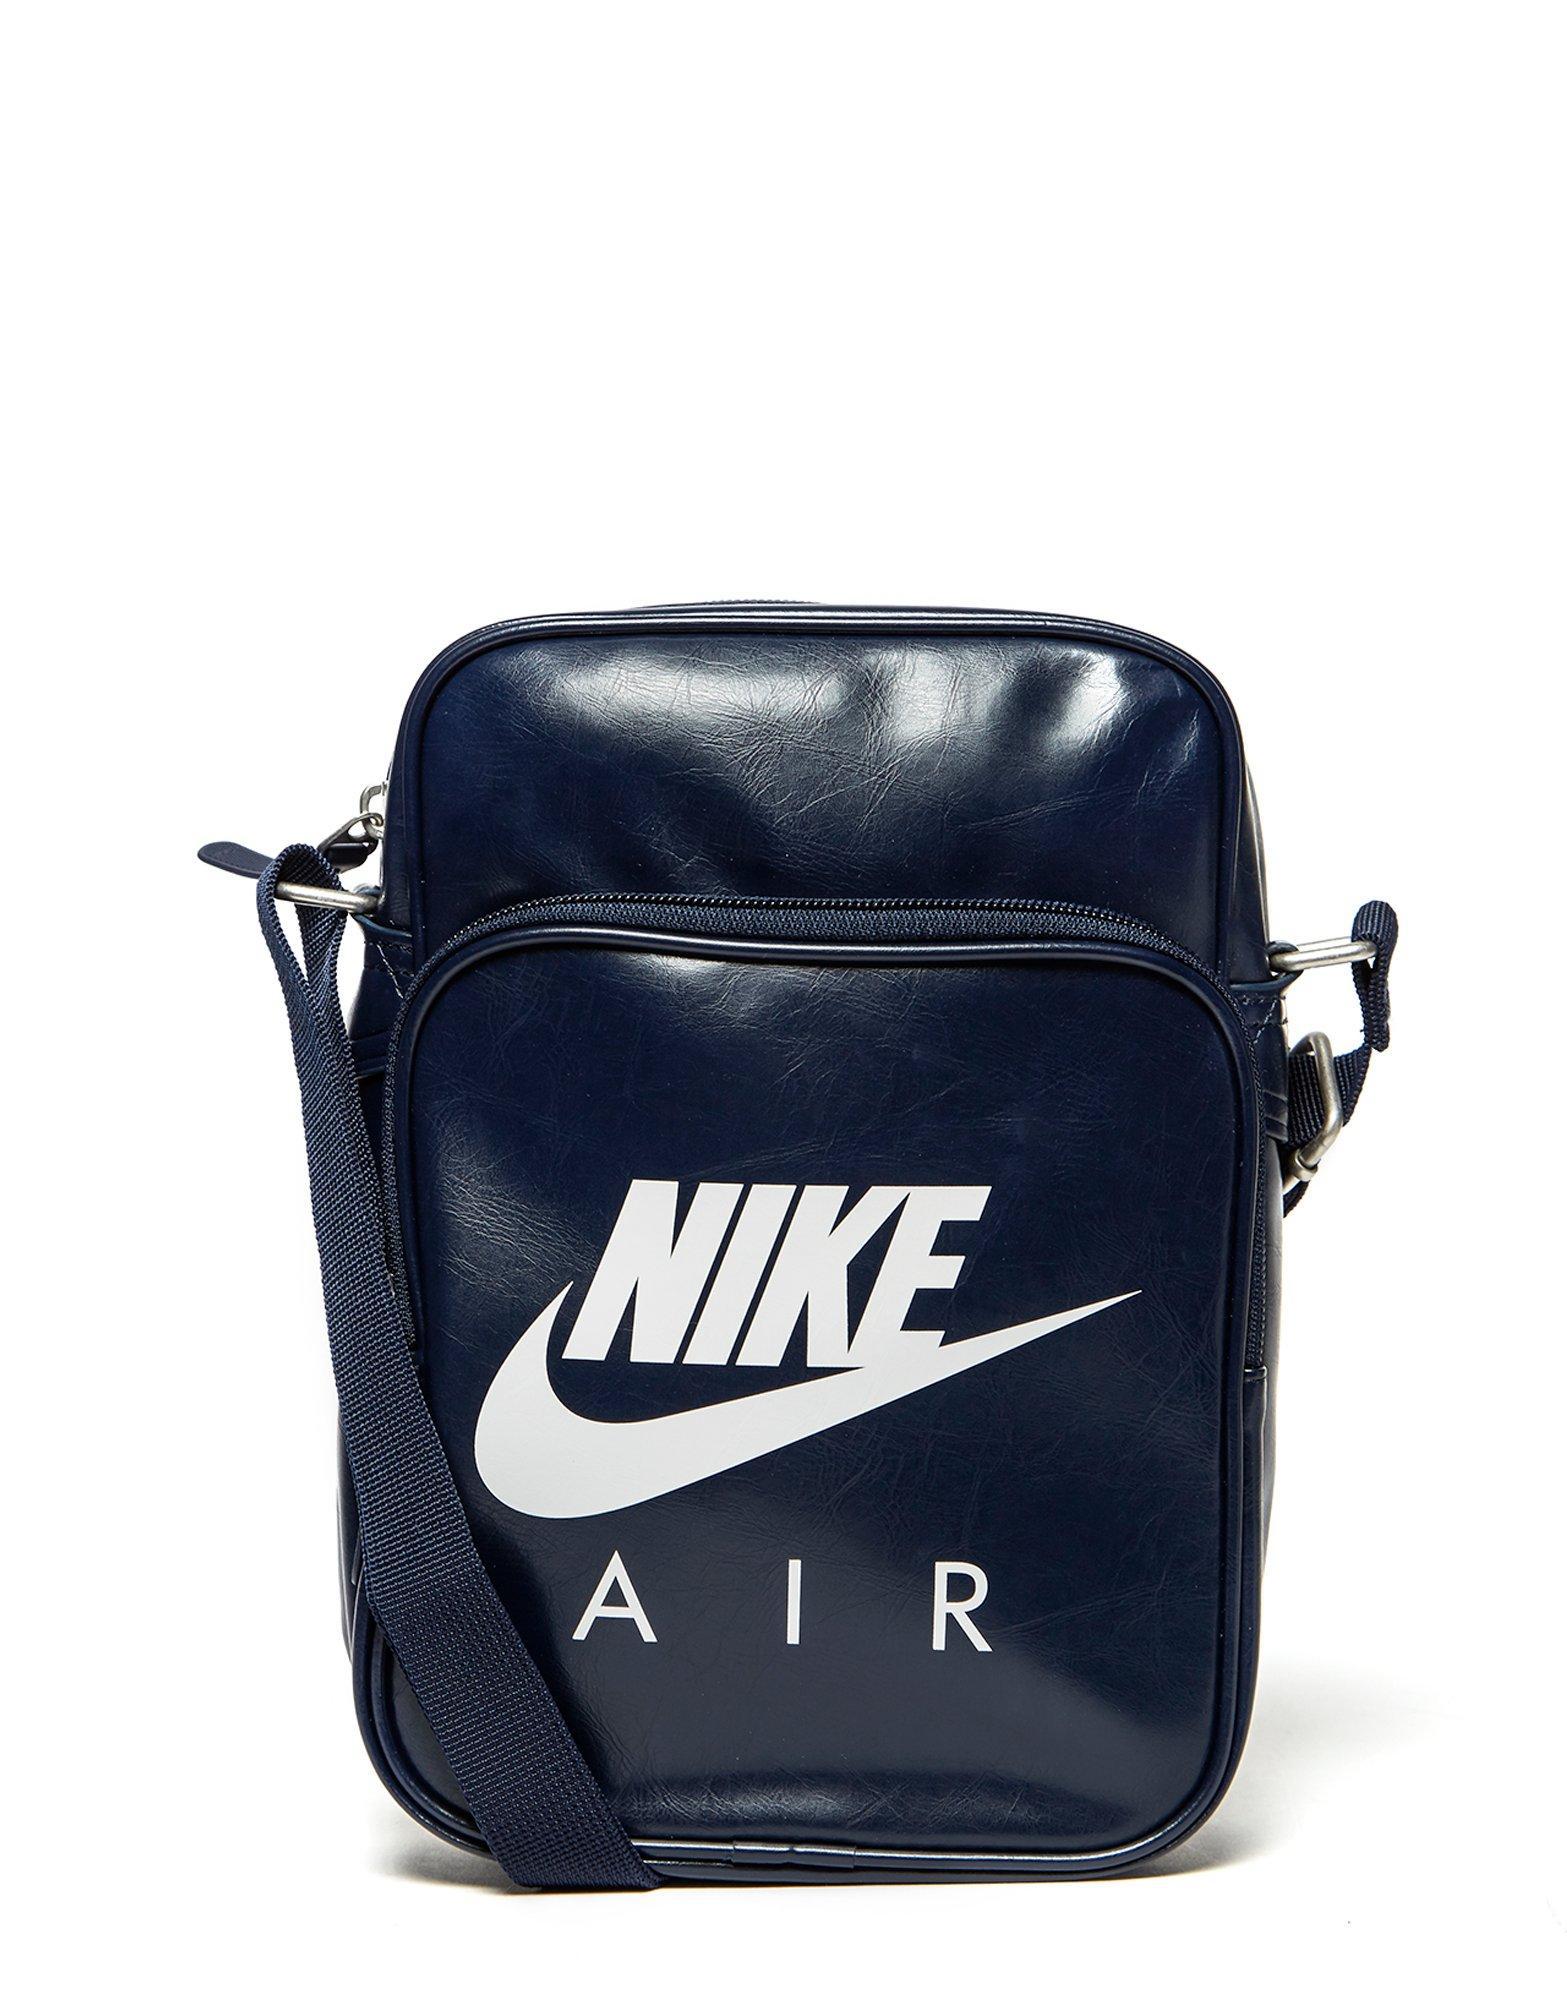 Nike Air Small Items Bag in Navy (Blue 